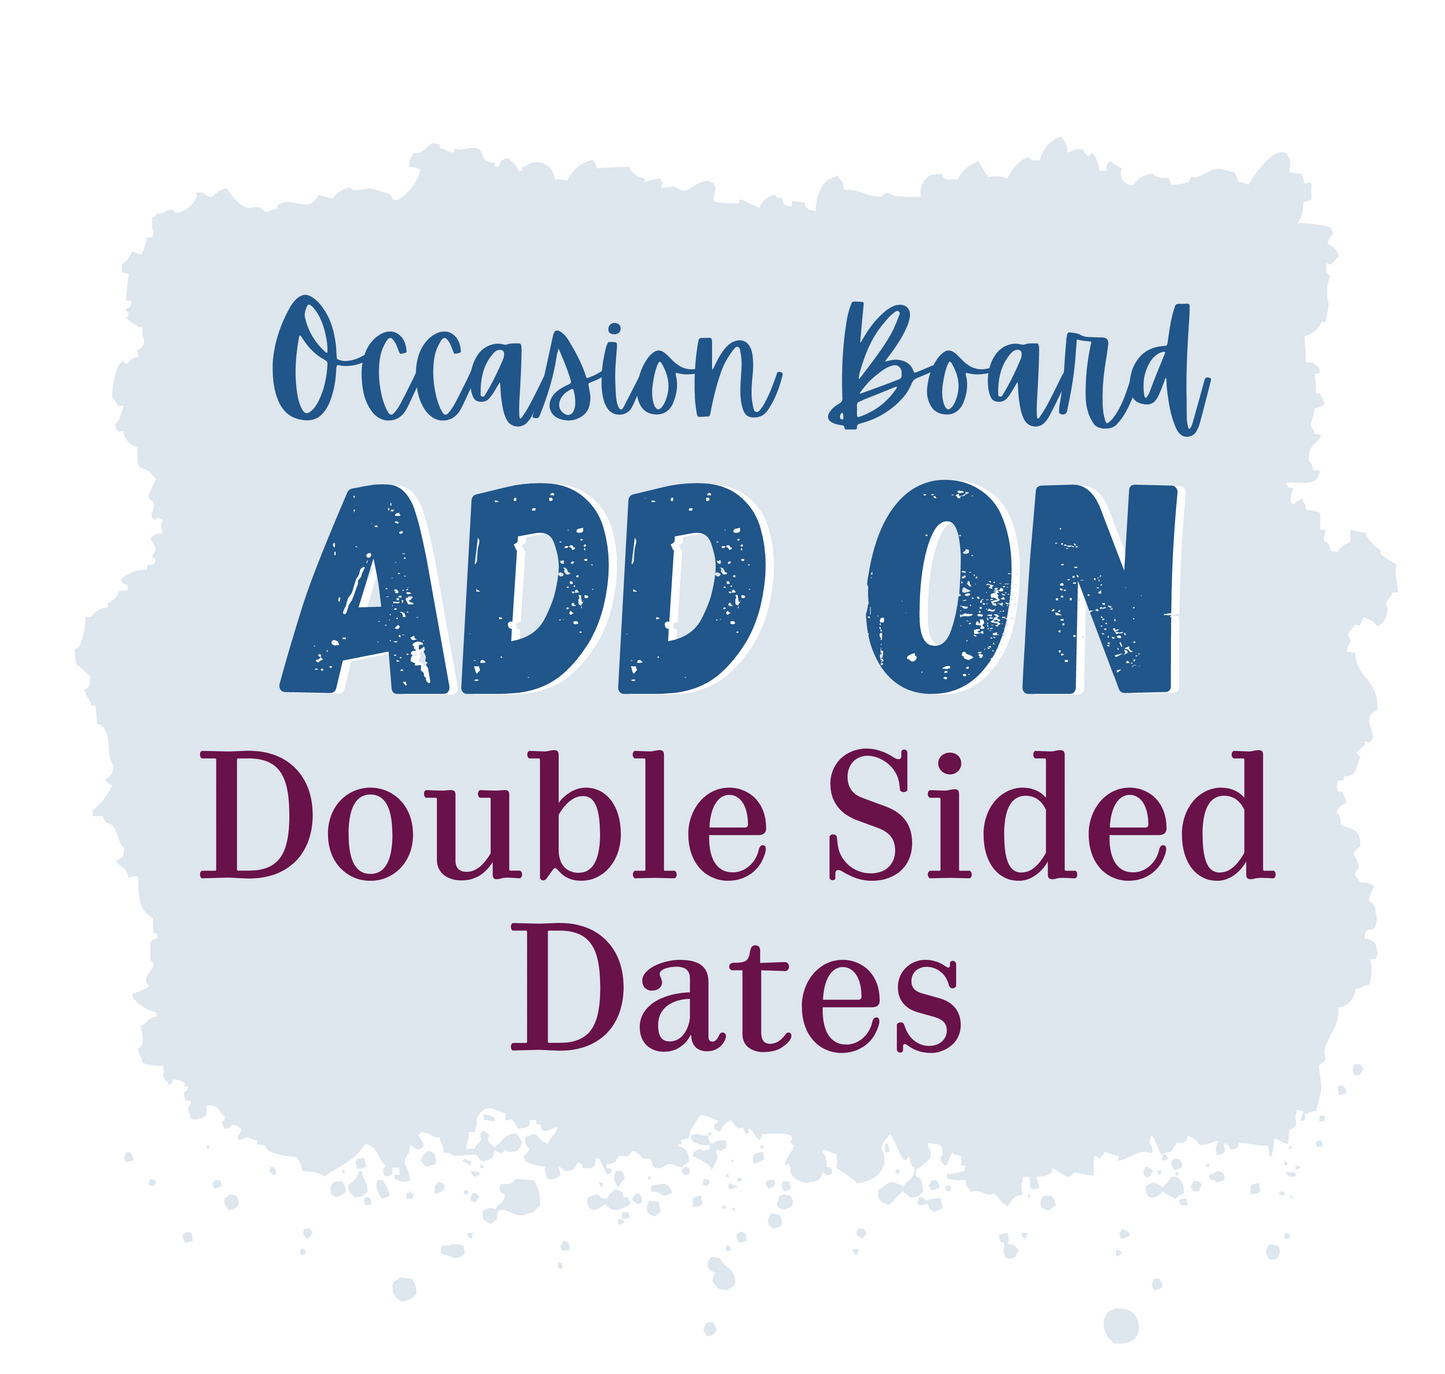 Add On: Double Sided Dates